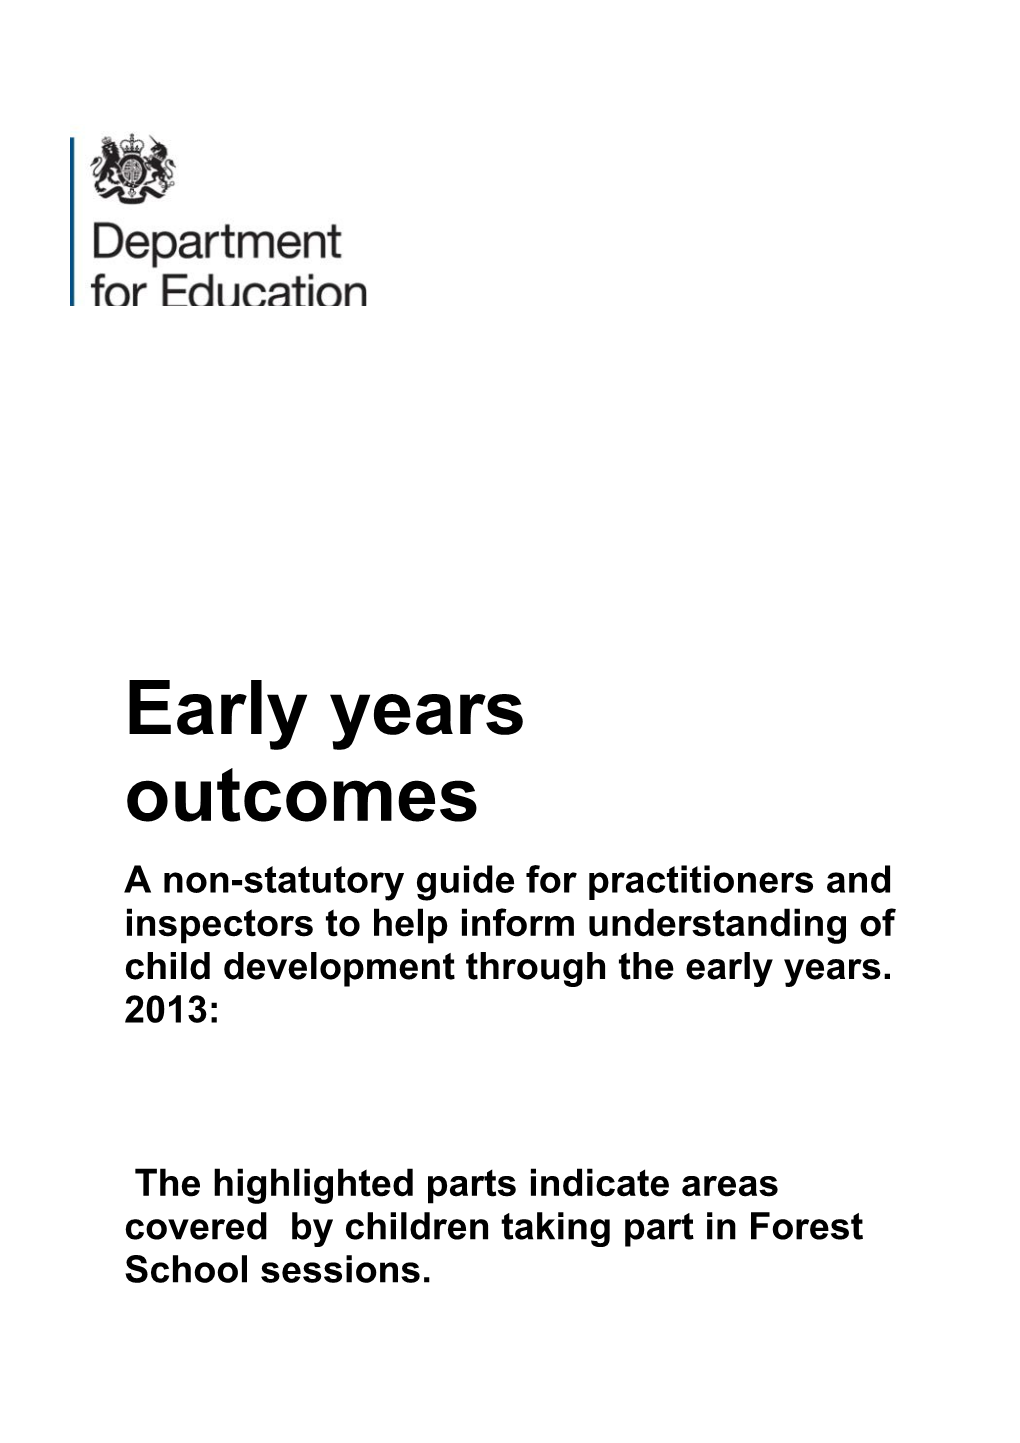 Early Years Outcomes